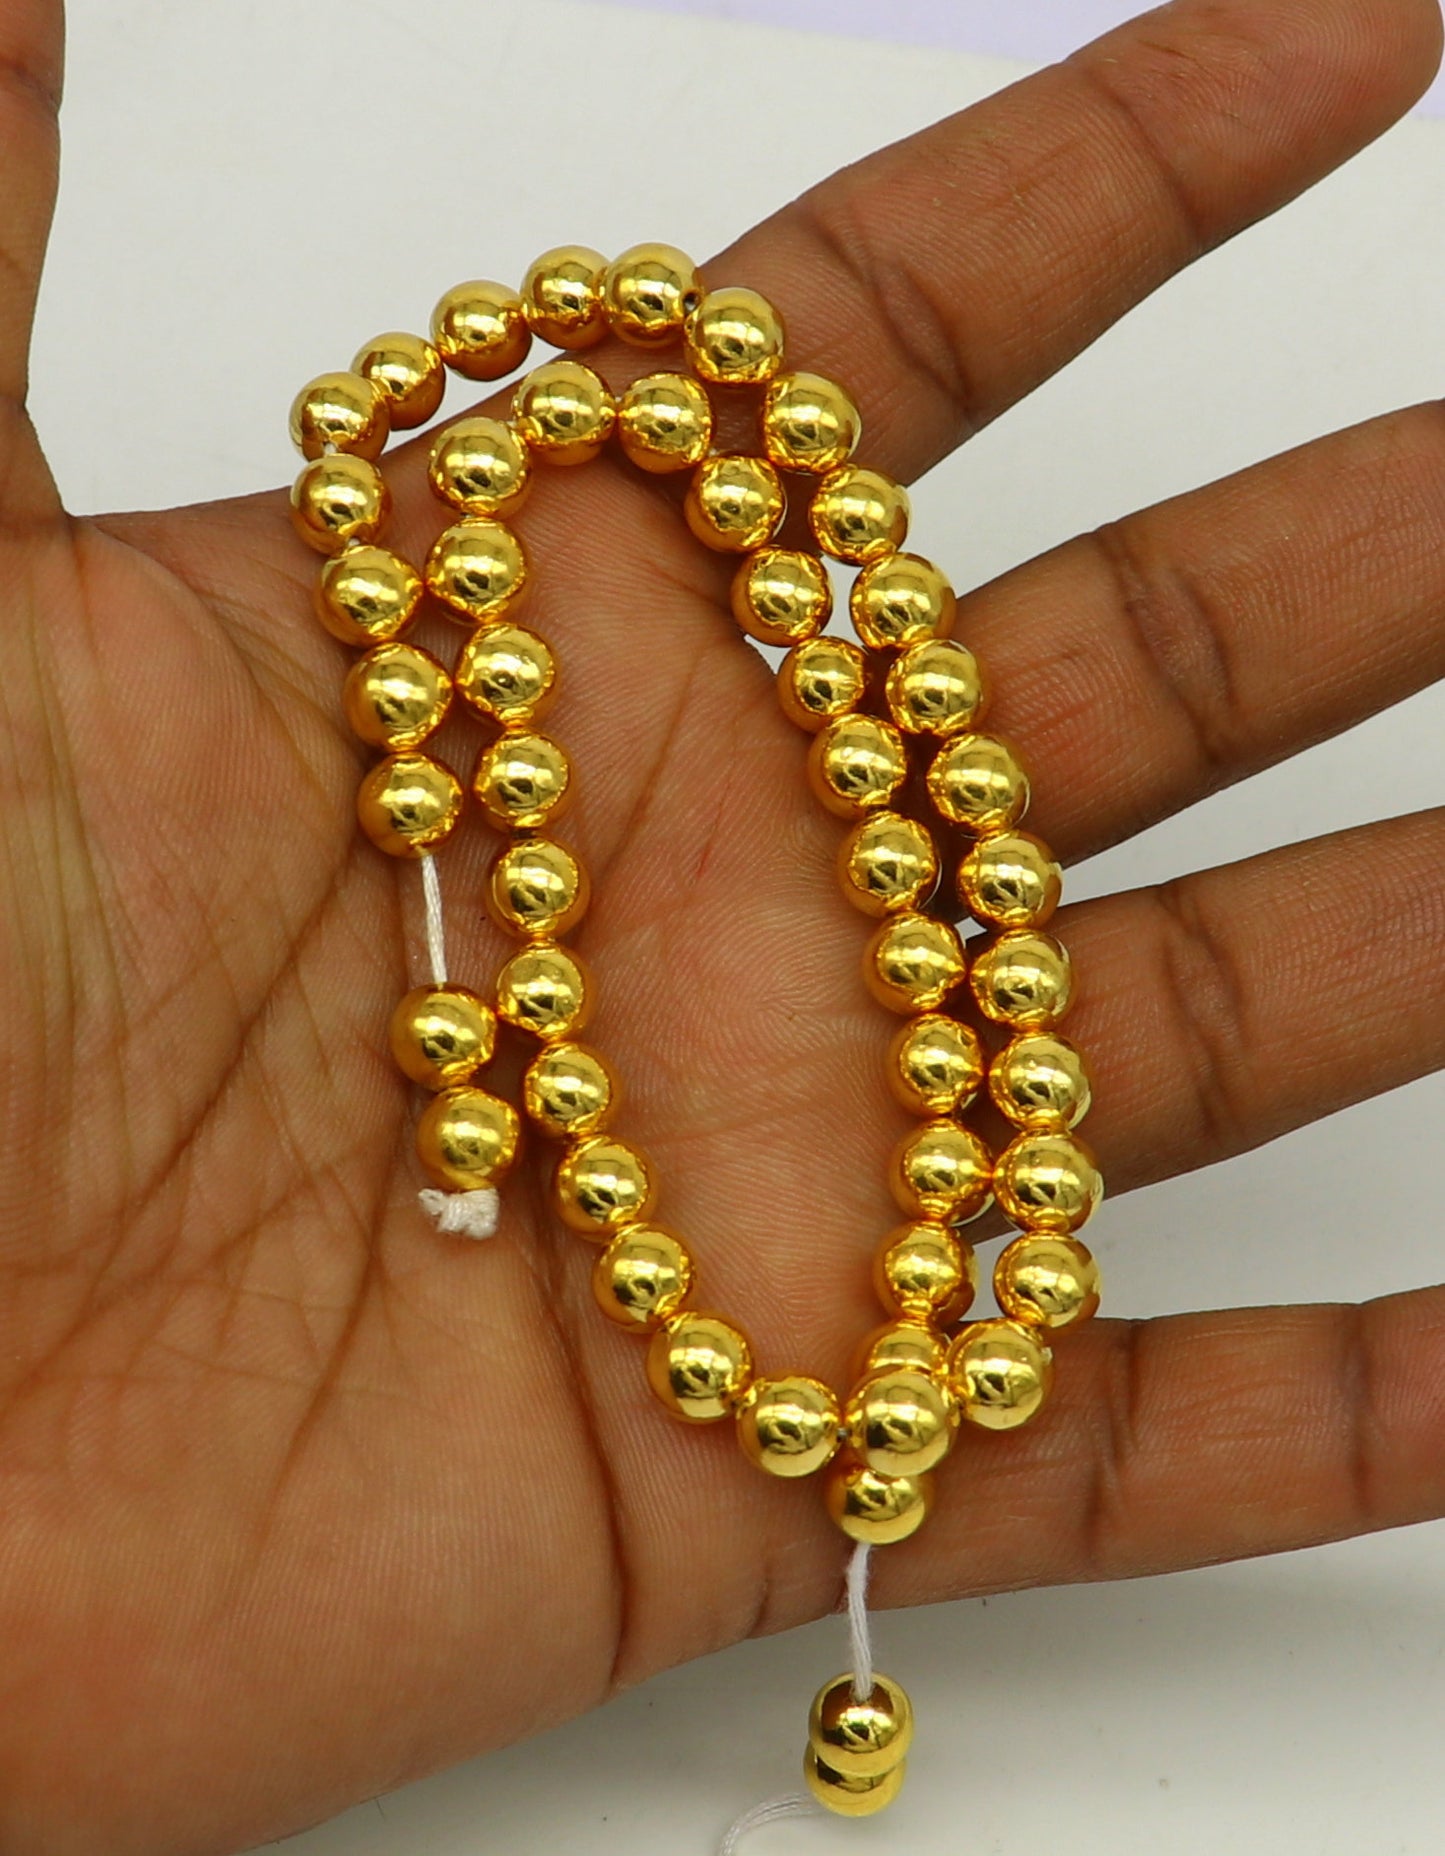 10 pieces 22kt yellow gold handmade 7 mm beads, loose beads, jewelry findings for customize jewelry, excellent wax beads findings from india - TRIBAL ORNAMENTS